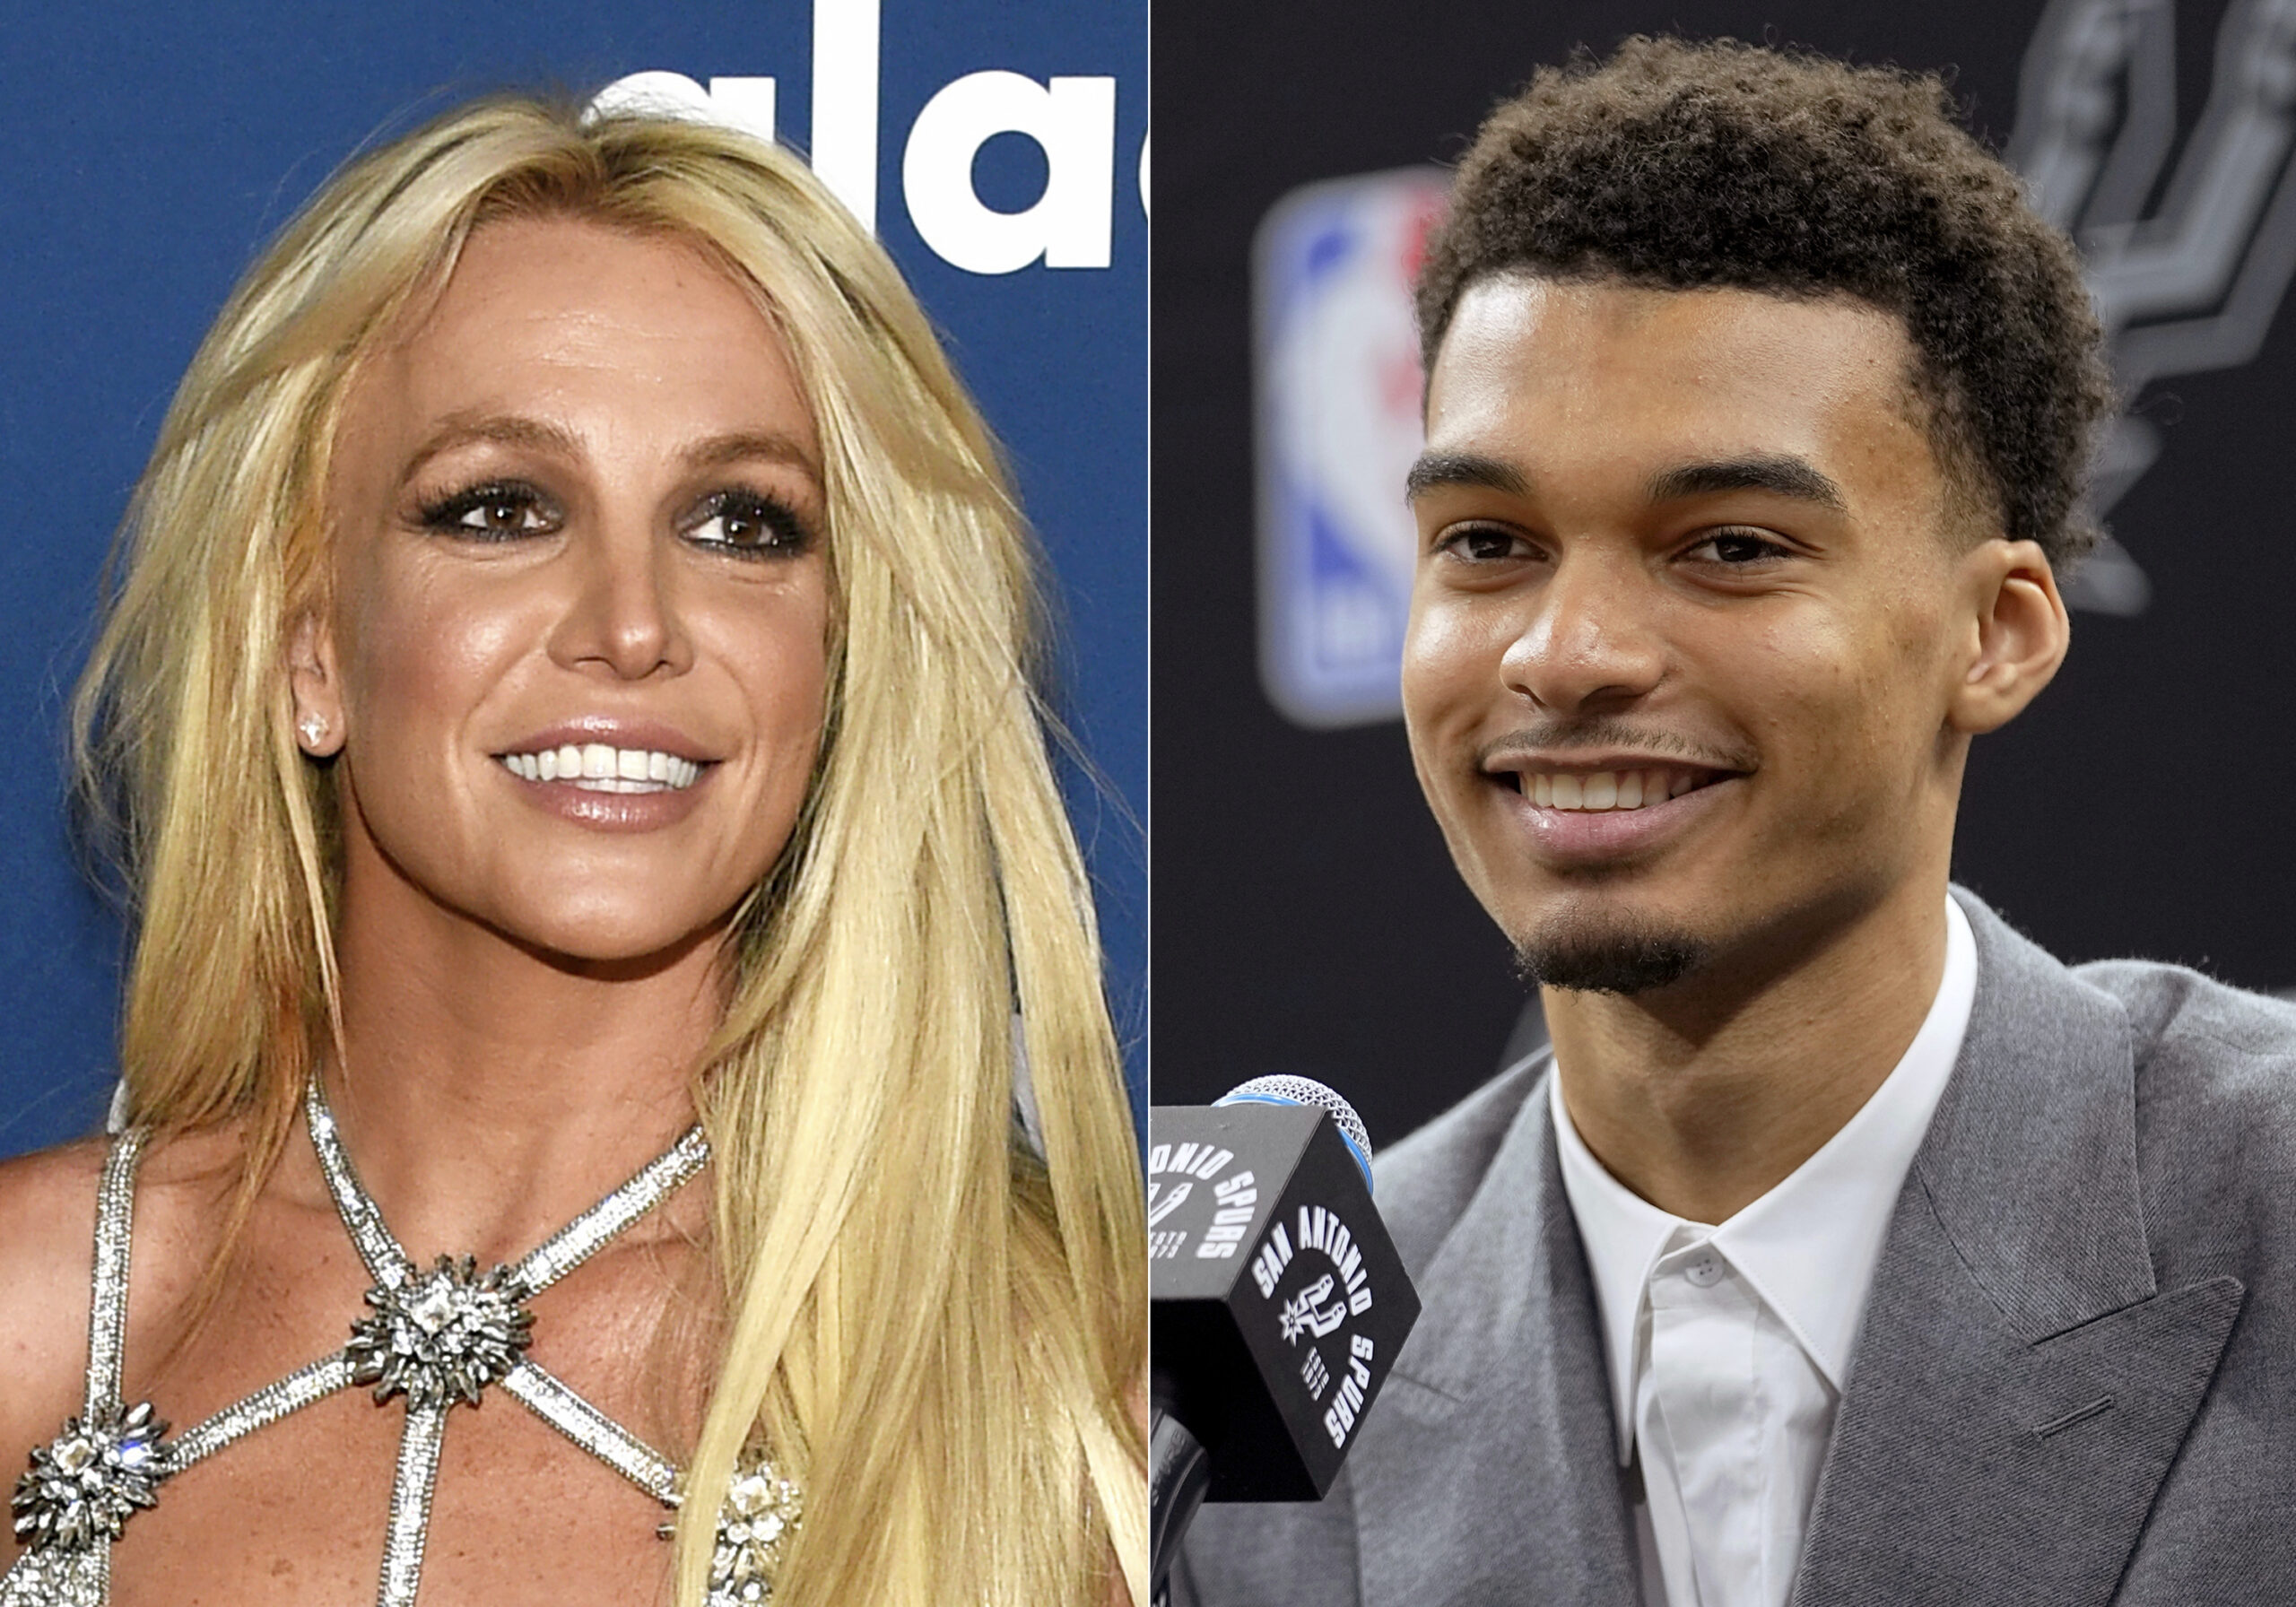 No charges will be filed following a brief investigation of the altercation involving pop star Britney Spears, San Antonio Spurs rookie Victor Wembanyama, and a member of the player’s security team